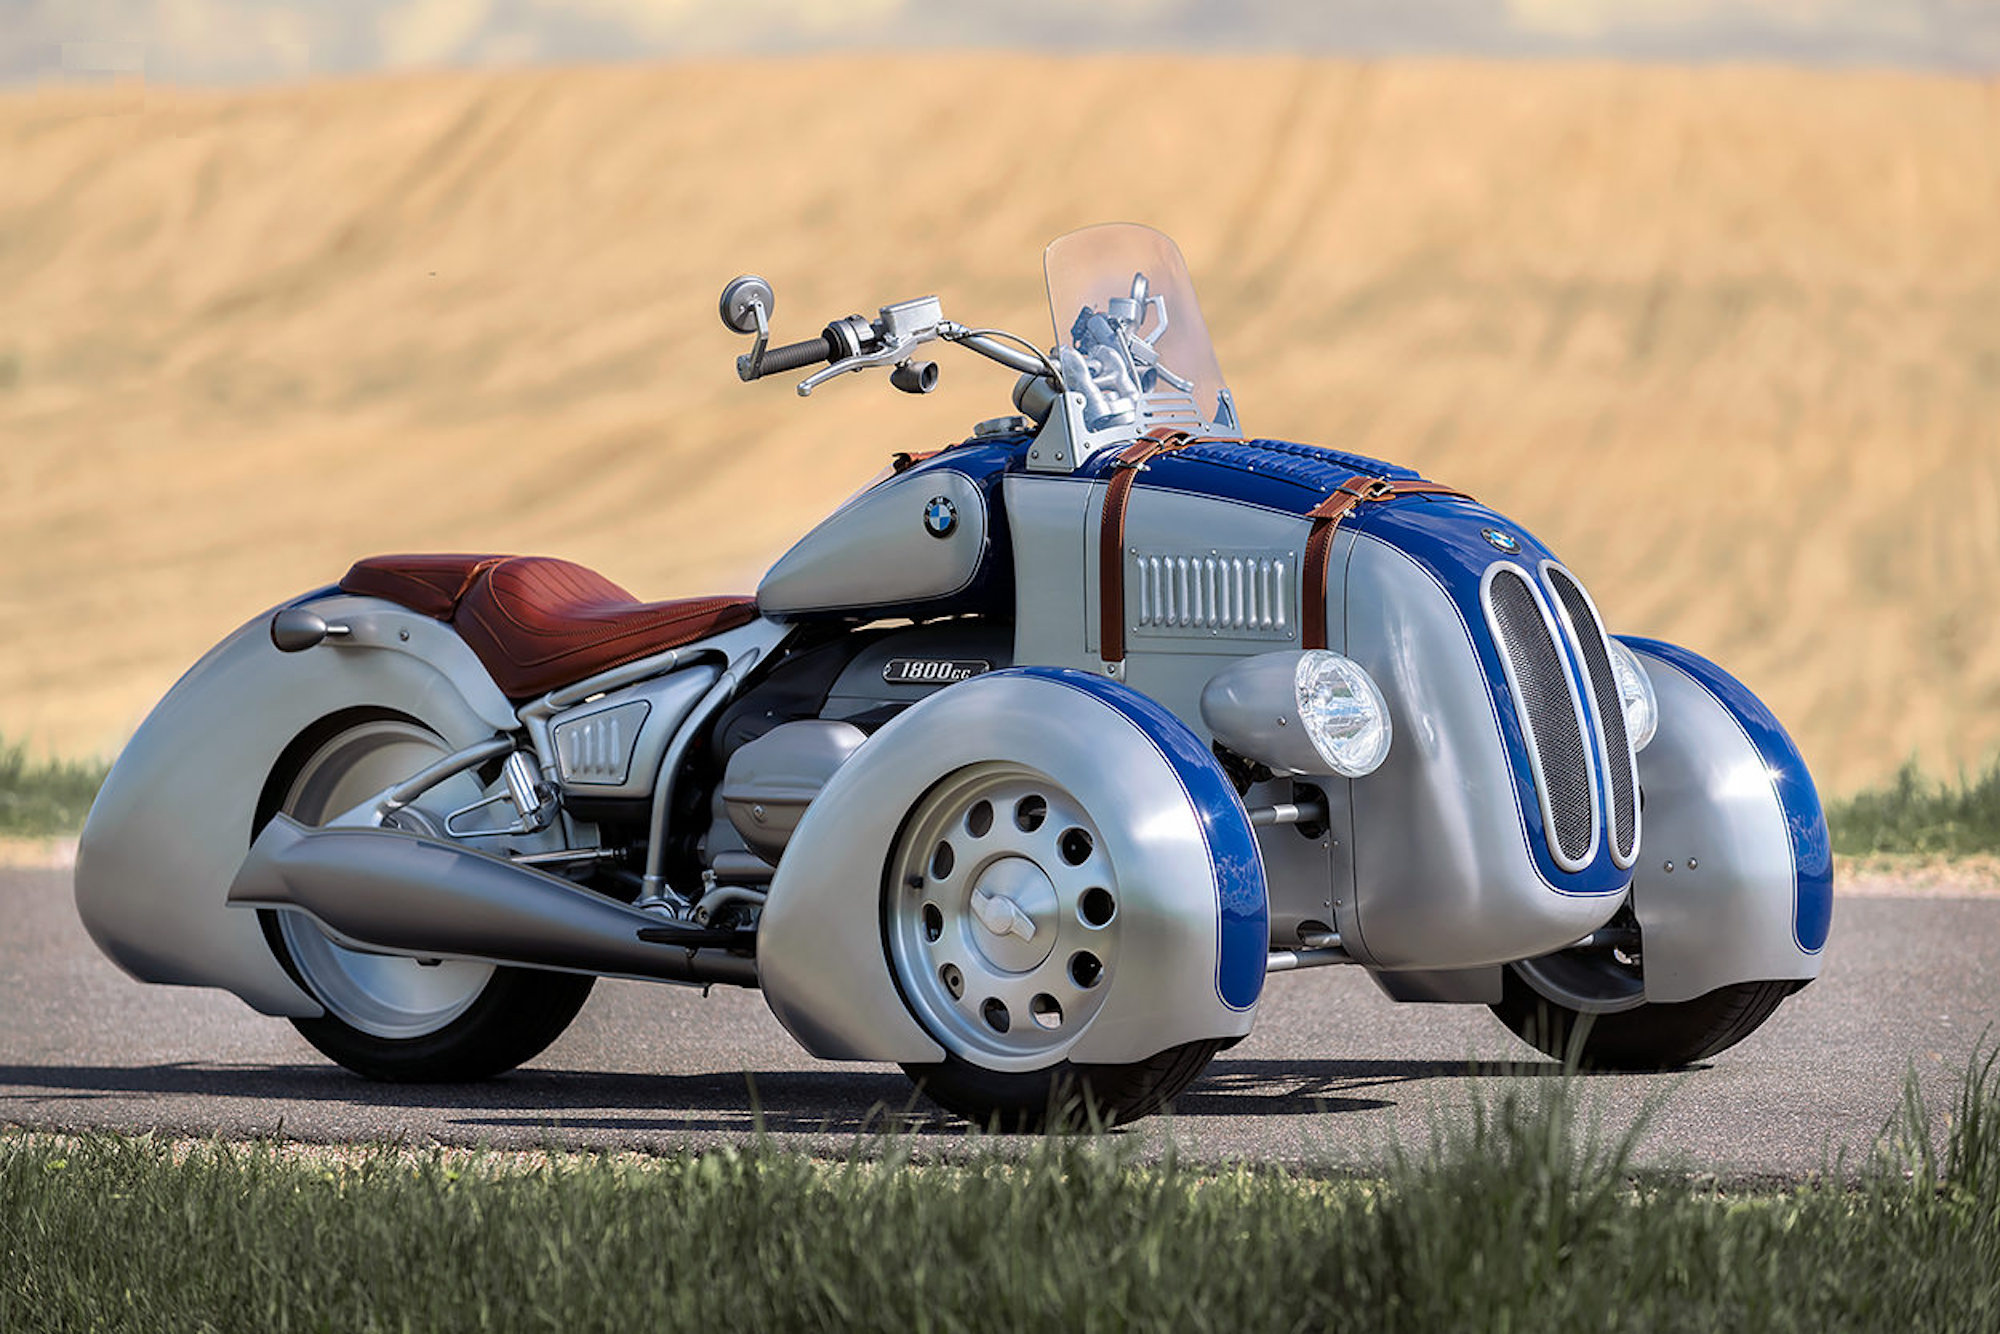 ShifCustoms' rendering of a three-wheeled R 18, inspired by a vintage 328. Media sourced from BikeEXIF.